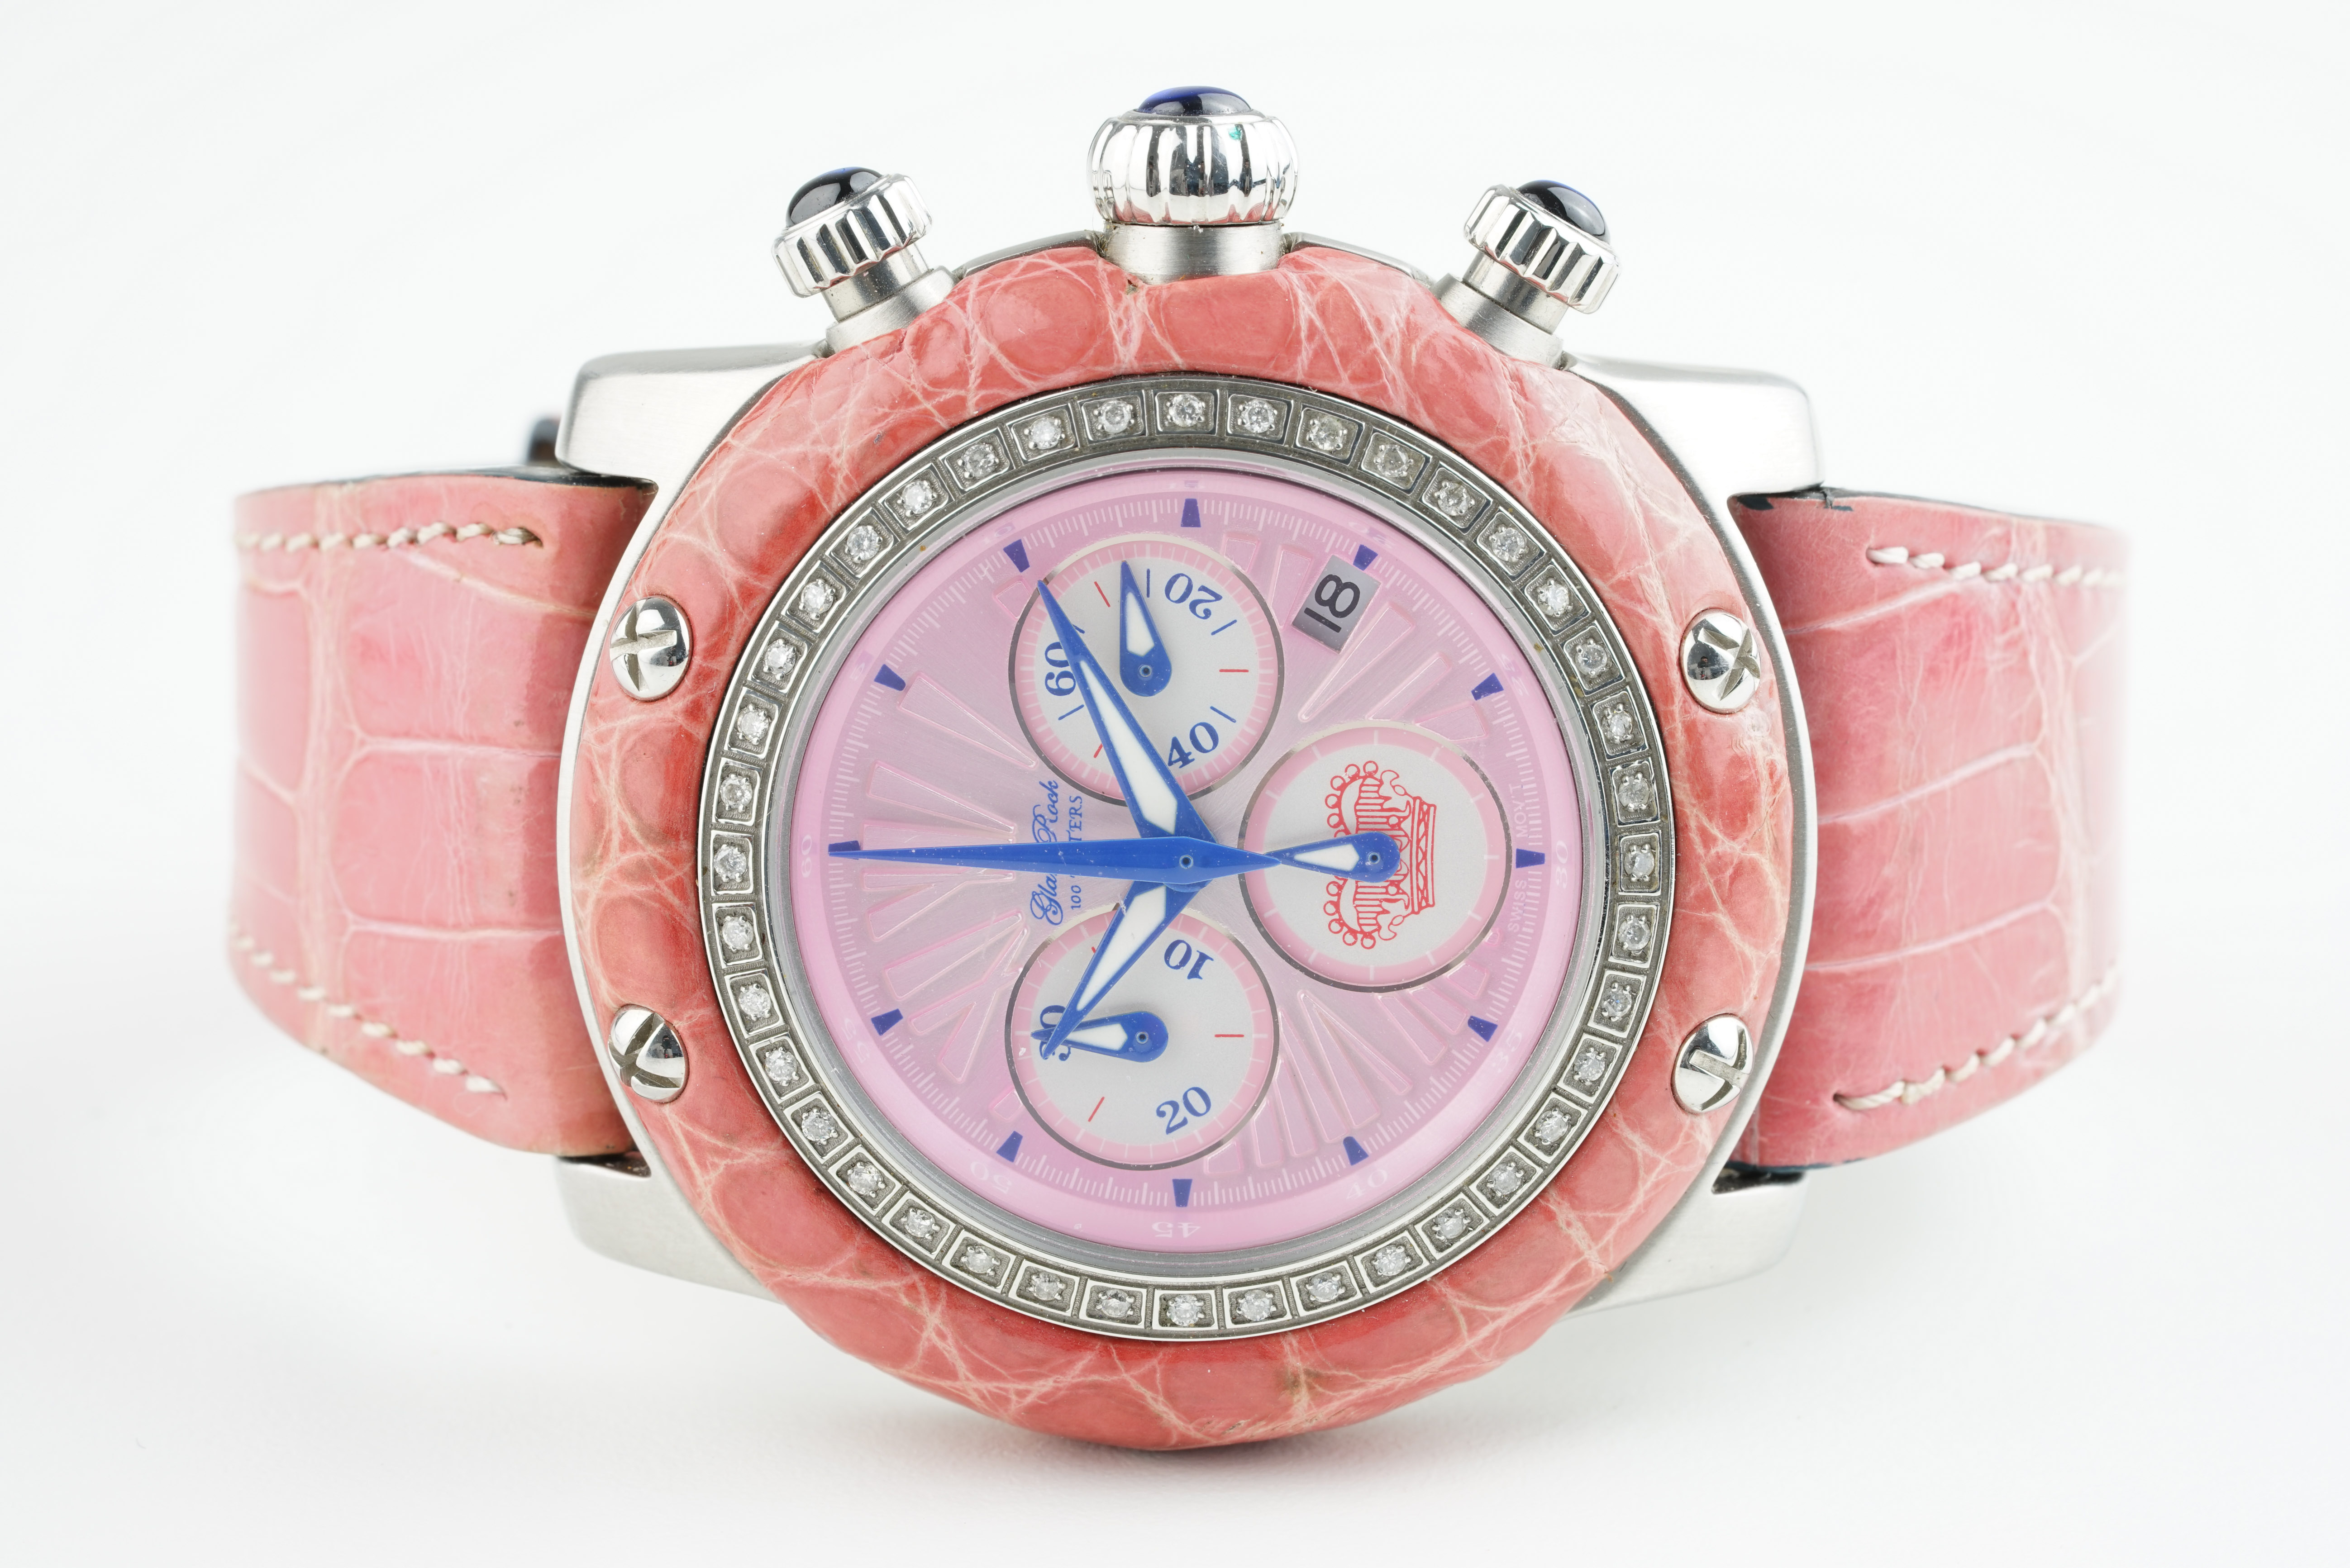 LADIES GLAM ROCK DIAMOND SET CHRONOGRAPH WRISTWATCH, circular triple register dial with hour markers